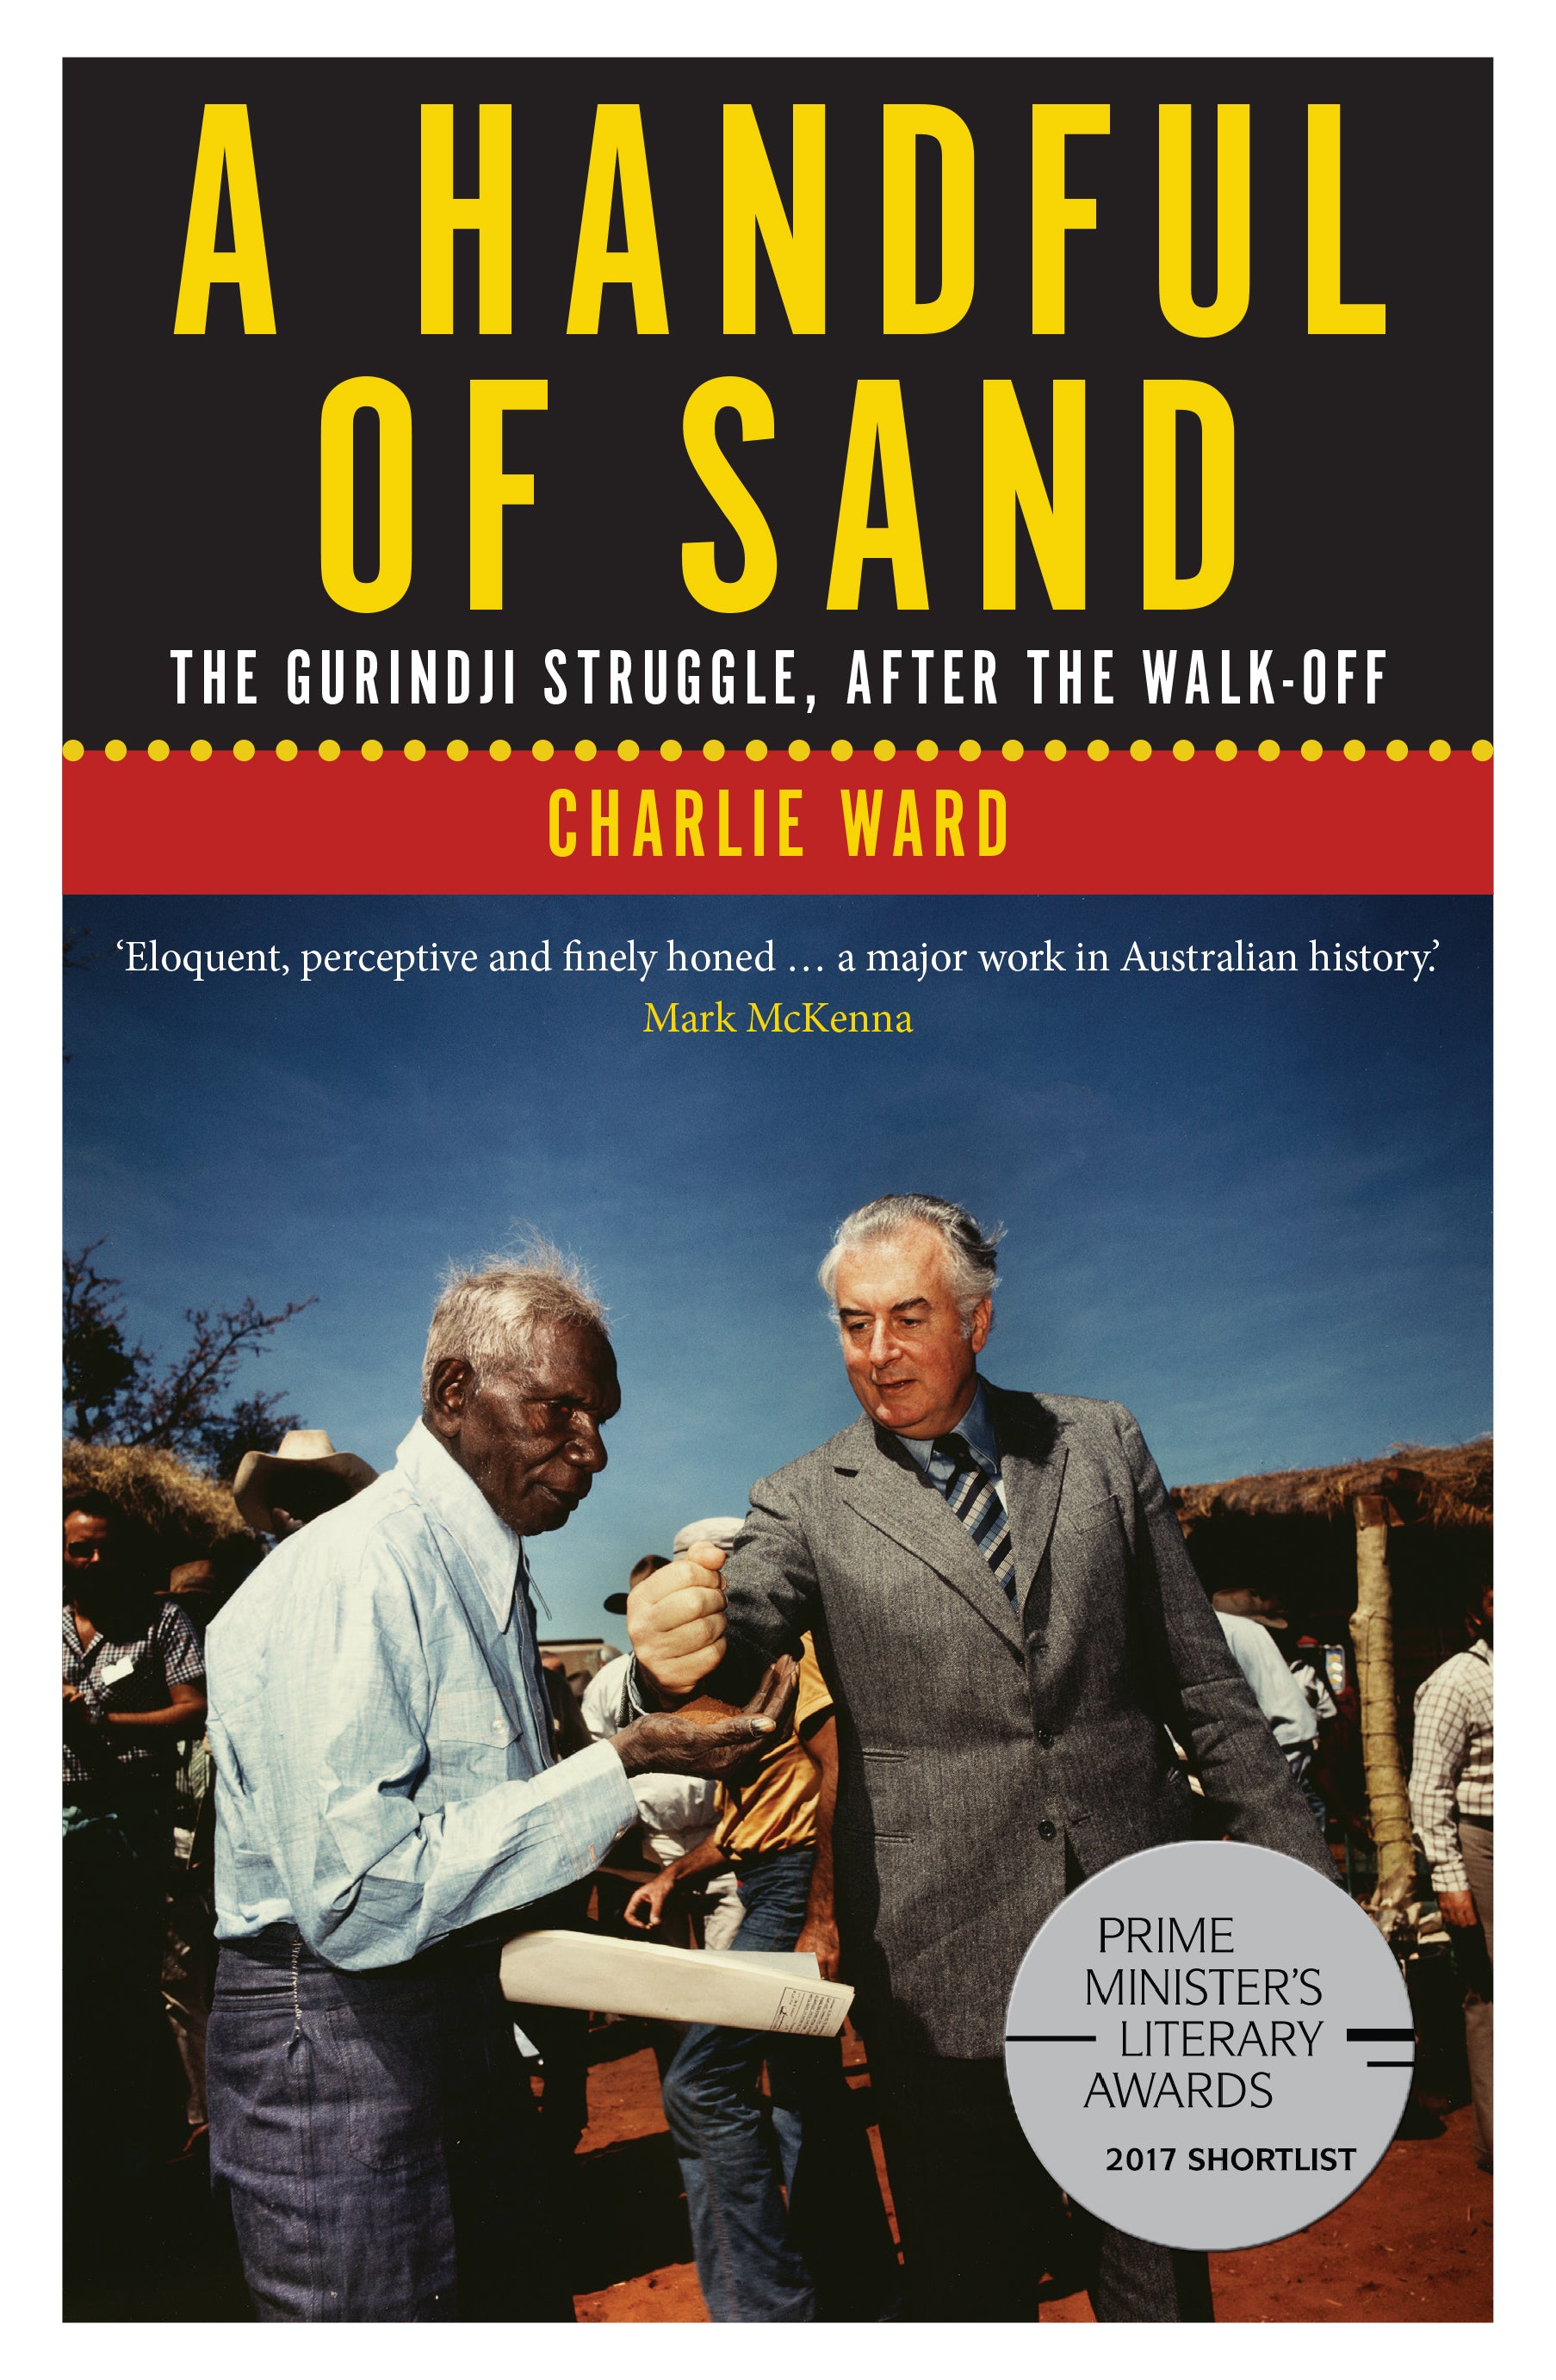 A Handful of Sand: The Gurindji Struggle, After the Walk-Off by Charlie Ward